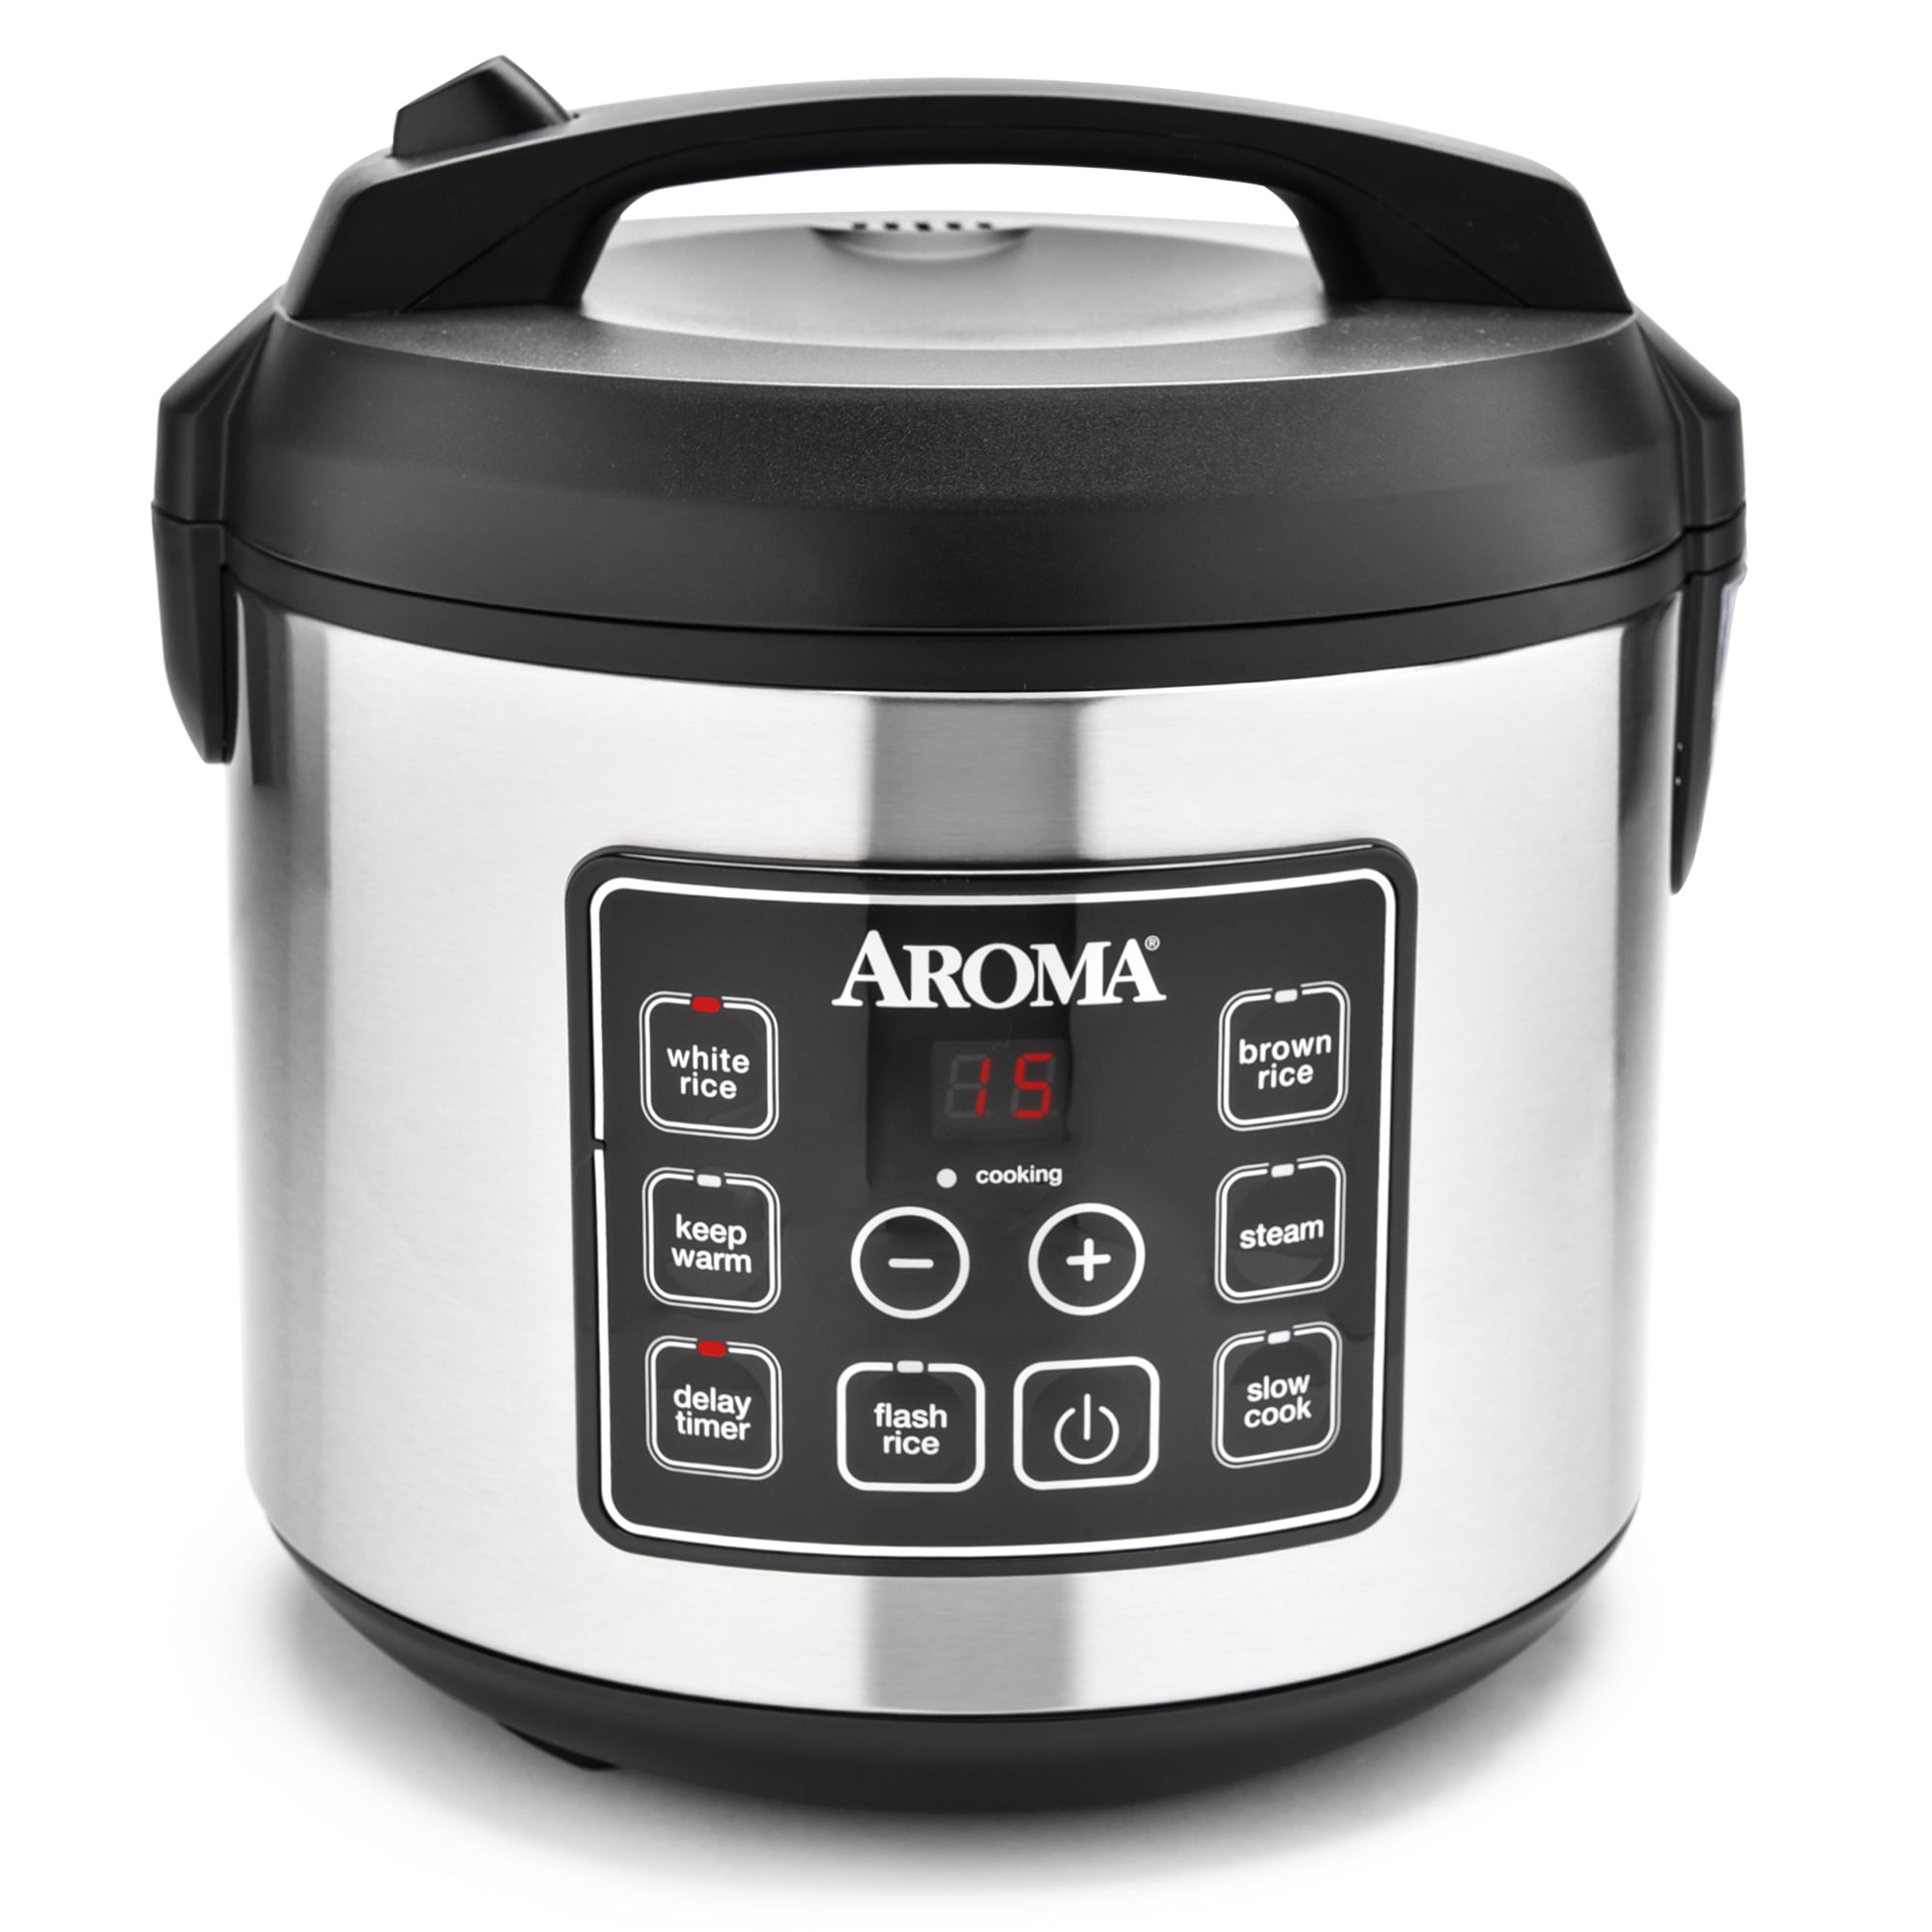 Aroma 20-Cup Programmable Rice Cooker, Slow Cooker and Food Steamer | eBay Aroma Rice Cooker Model Arc 930